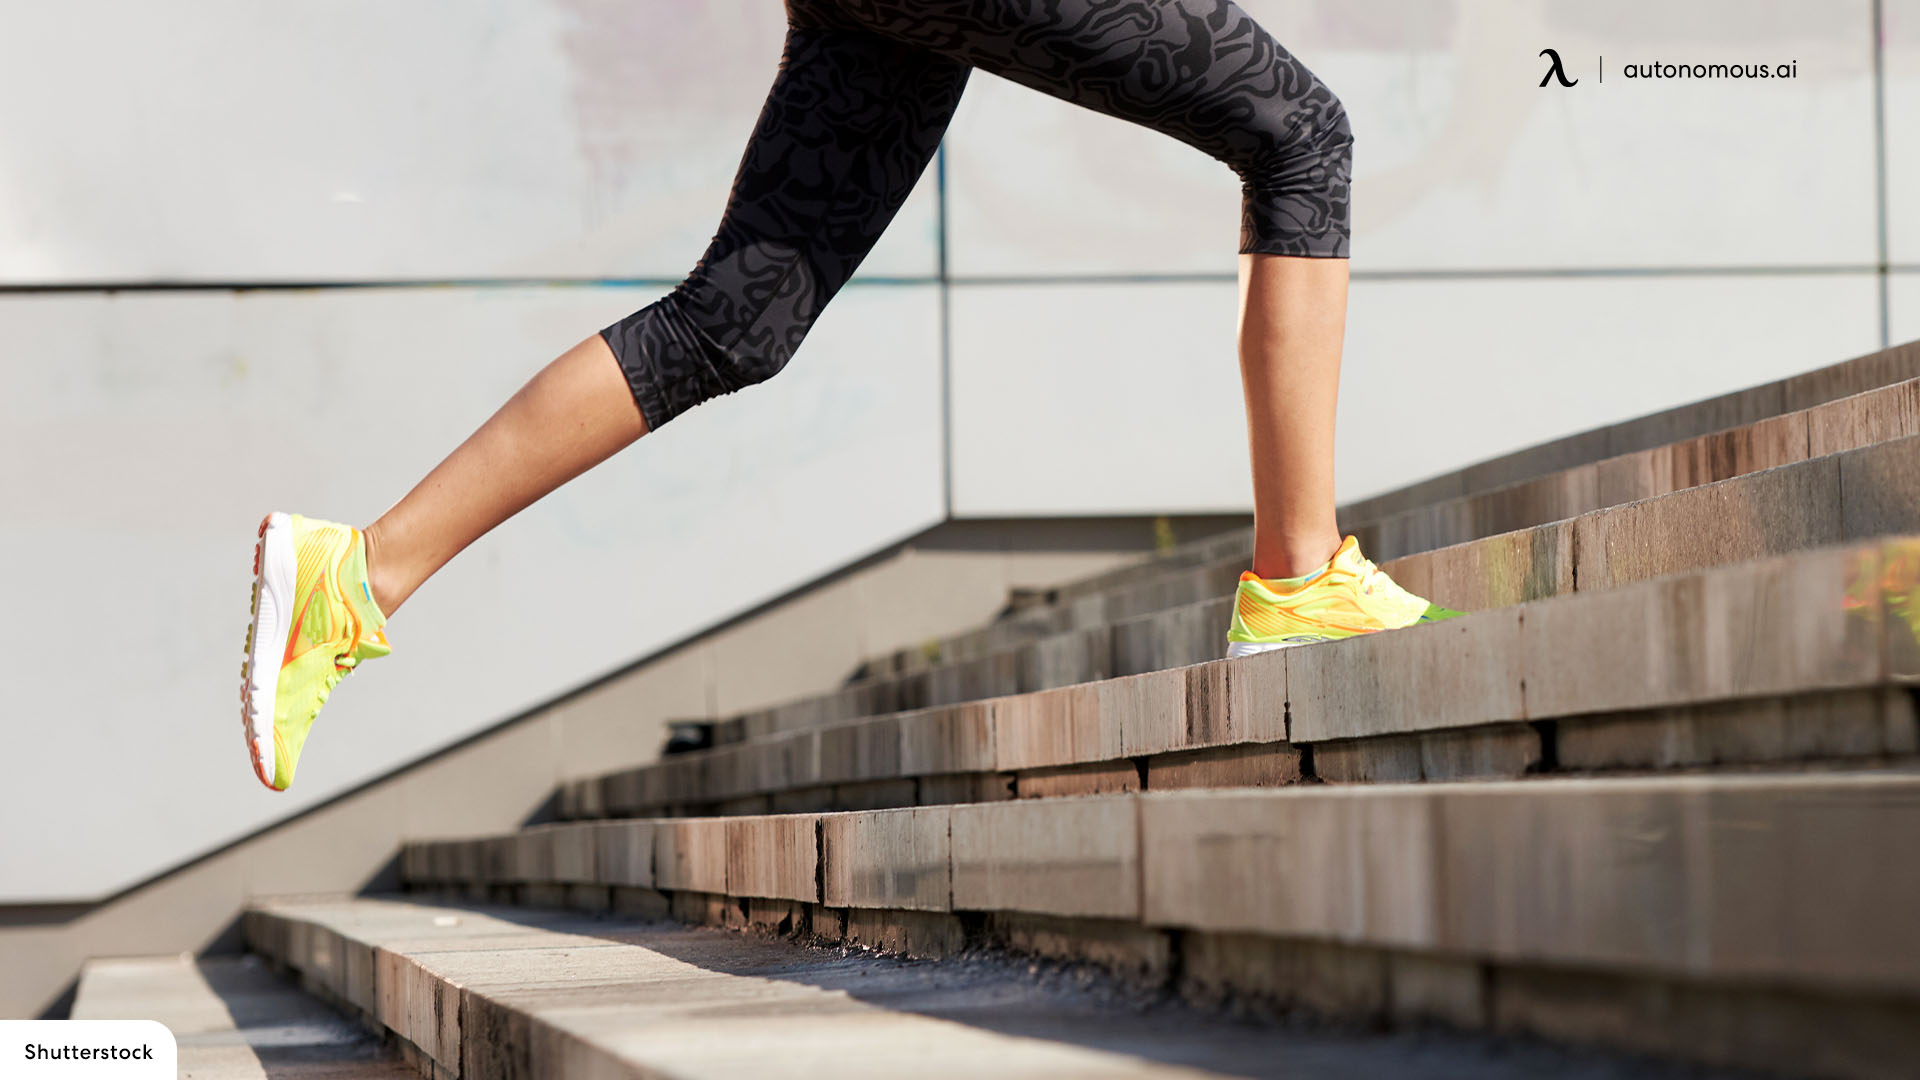 Take The Stairs employee wellness challenges